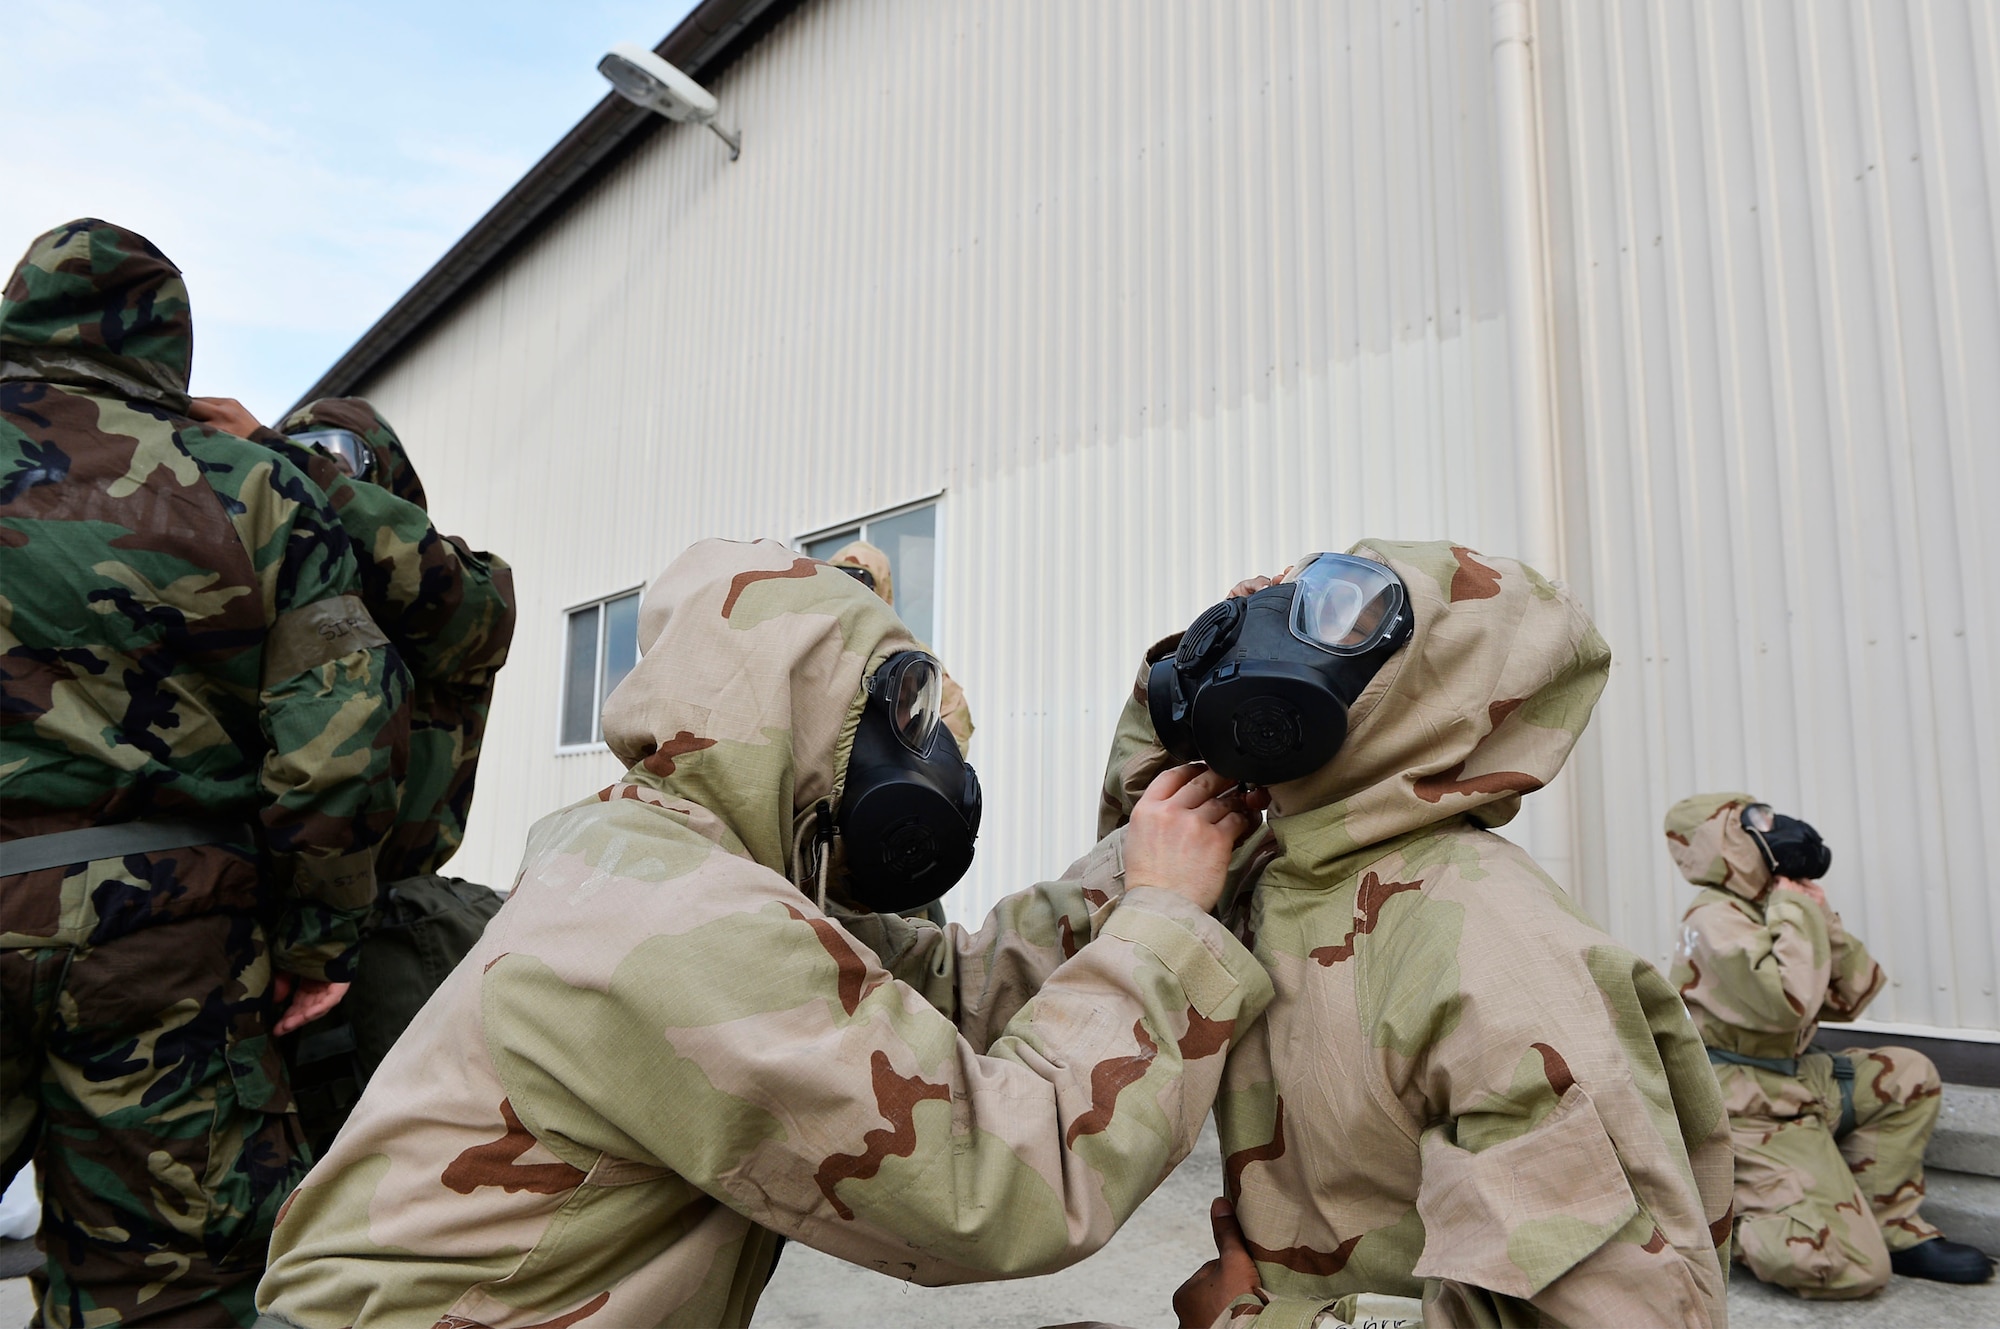 U.S. Airmen assigned to the 86th Civil Engineer Group on Ramstein Air Base, Germany, assist each other in donning protective gear during an exercise training service members to respond to chemical, biological, radiological, and nuclear threats, April 12, 2018. The Air Force requires service members to maintain ample knowledge of CBRN operations regardless of rank or career field. (U.S. Air Force photo by Senior Airman Joshua Magbanua)